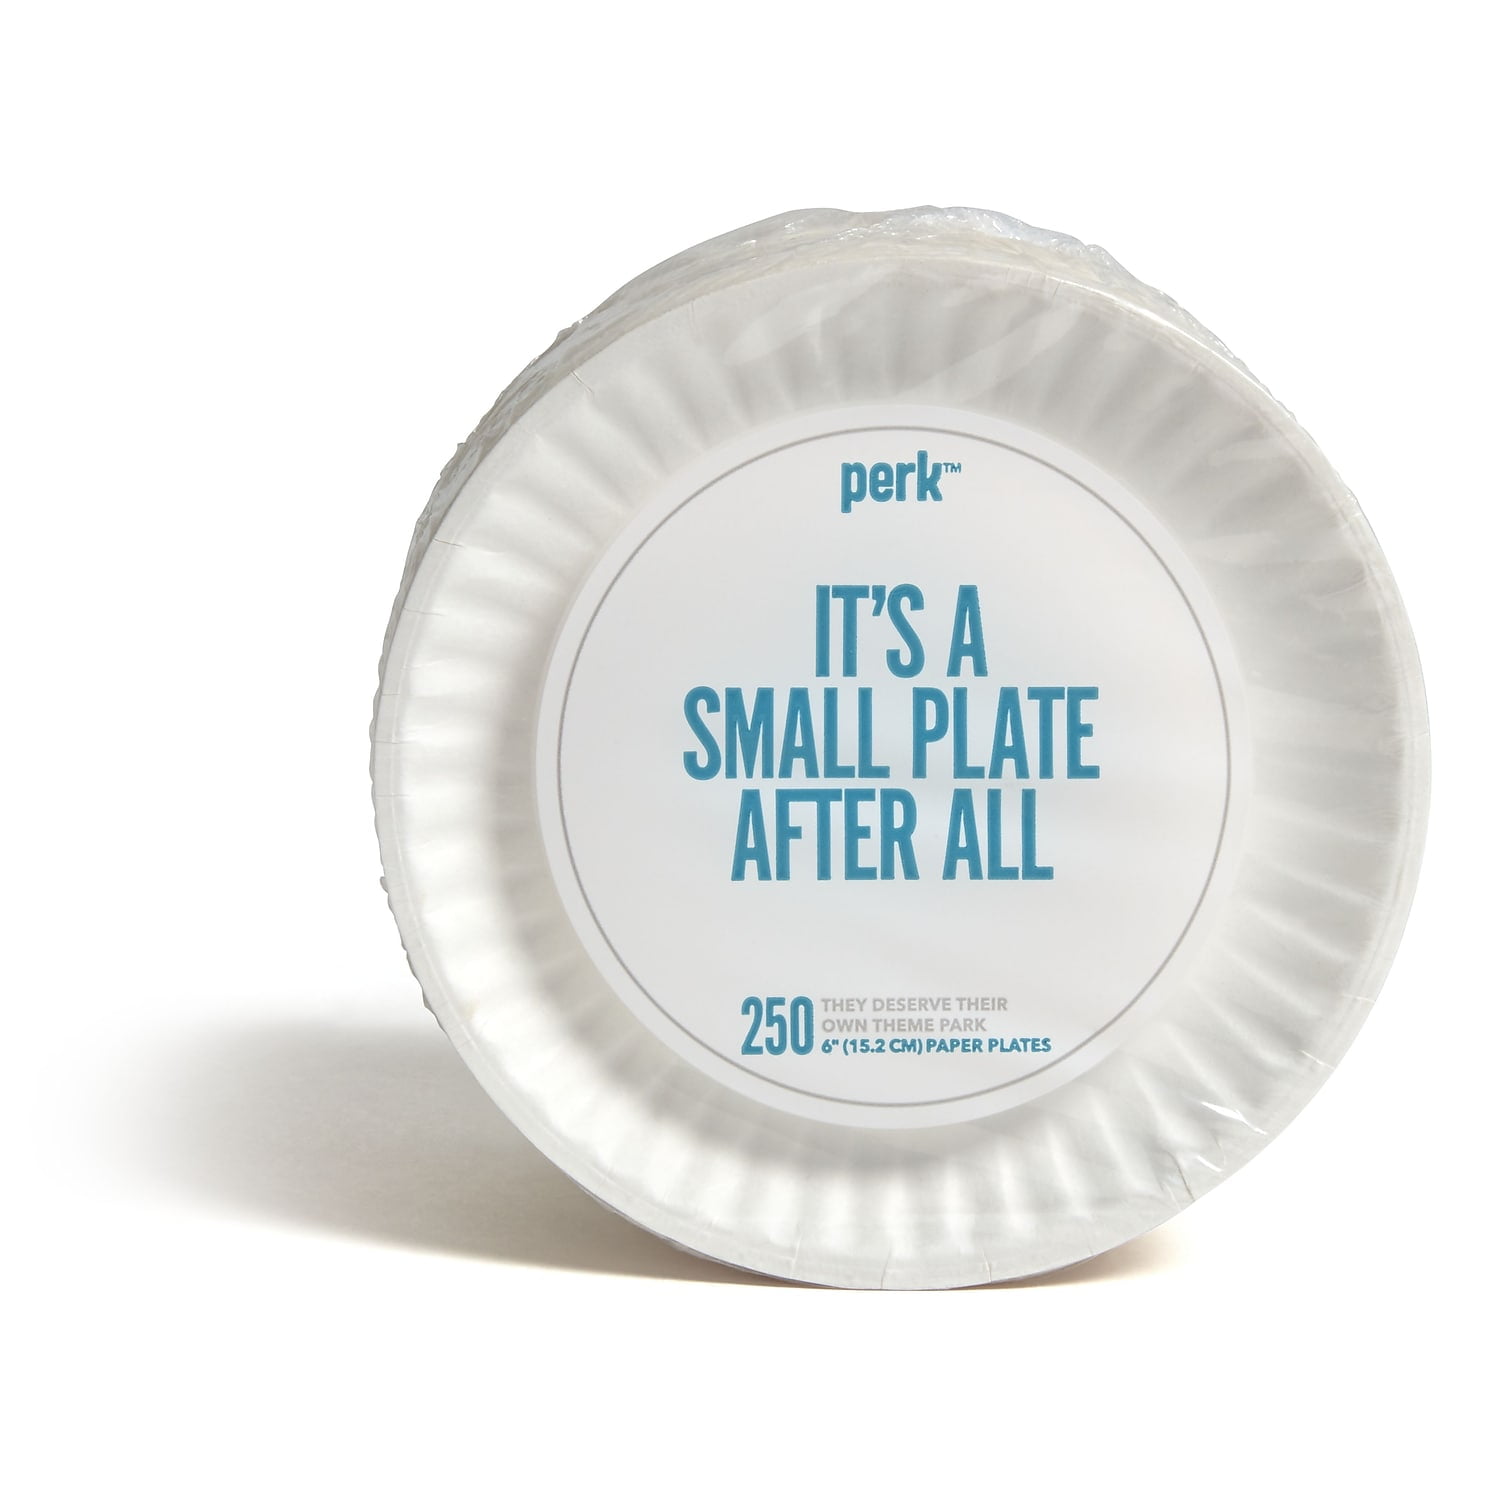  Hygloss Products Paper Plates - Uncoated White Plate - Use for  Foodware, Events, Activities, Crafts Projects and More - Environmentally  Friendly - Recyclable and Disposable - 6-Inches - 100 Pack : Everything Else